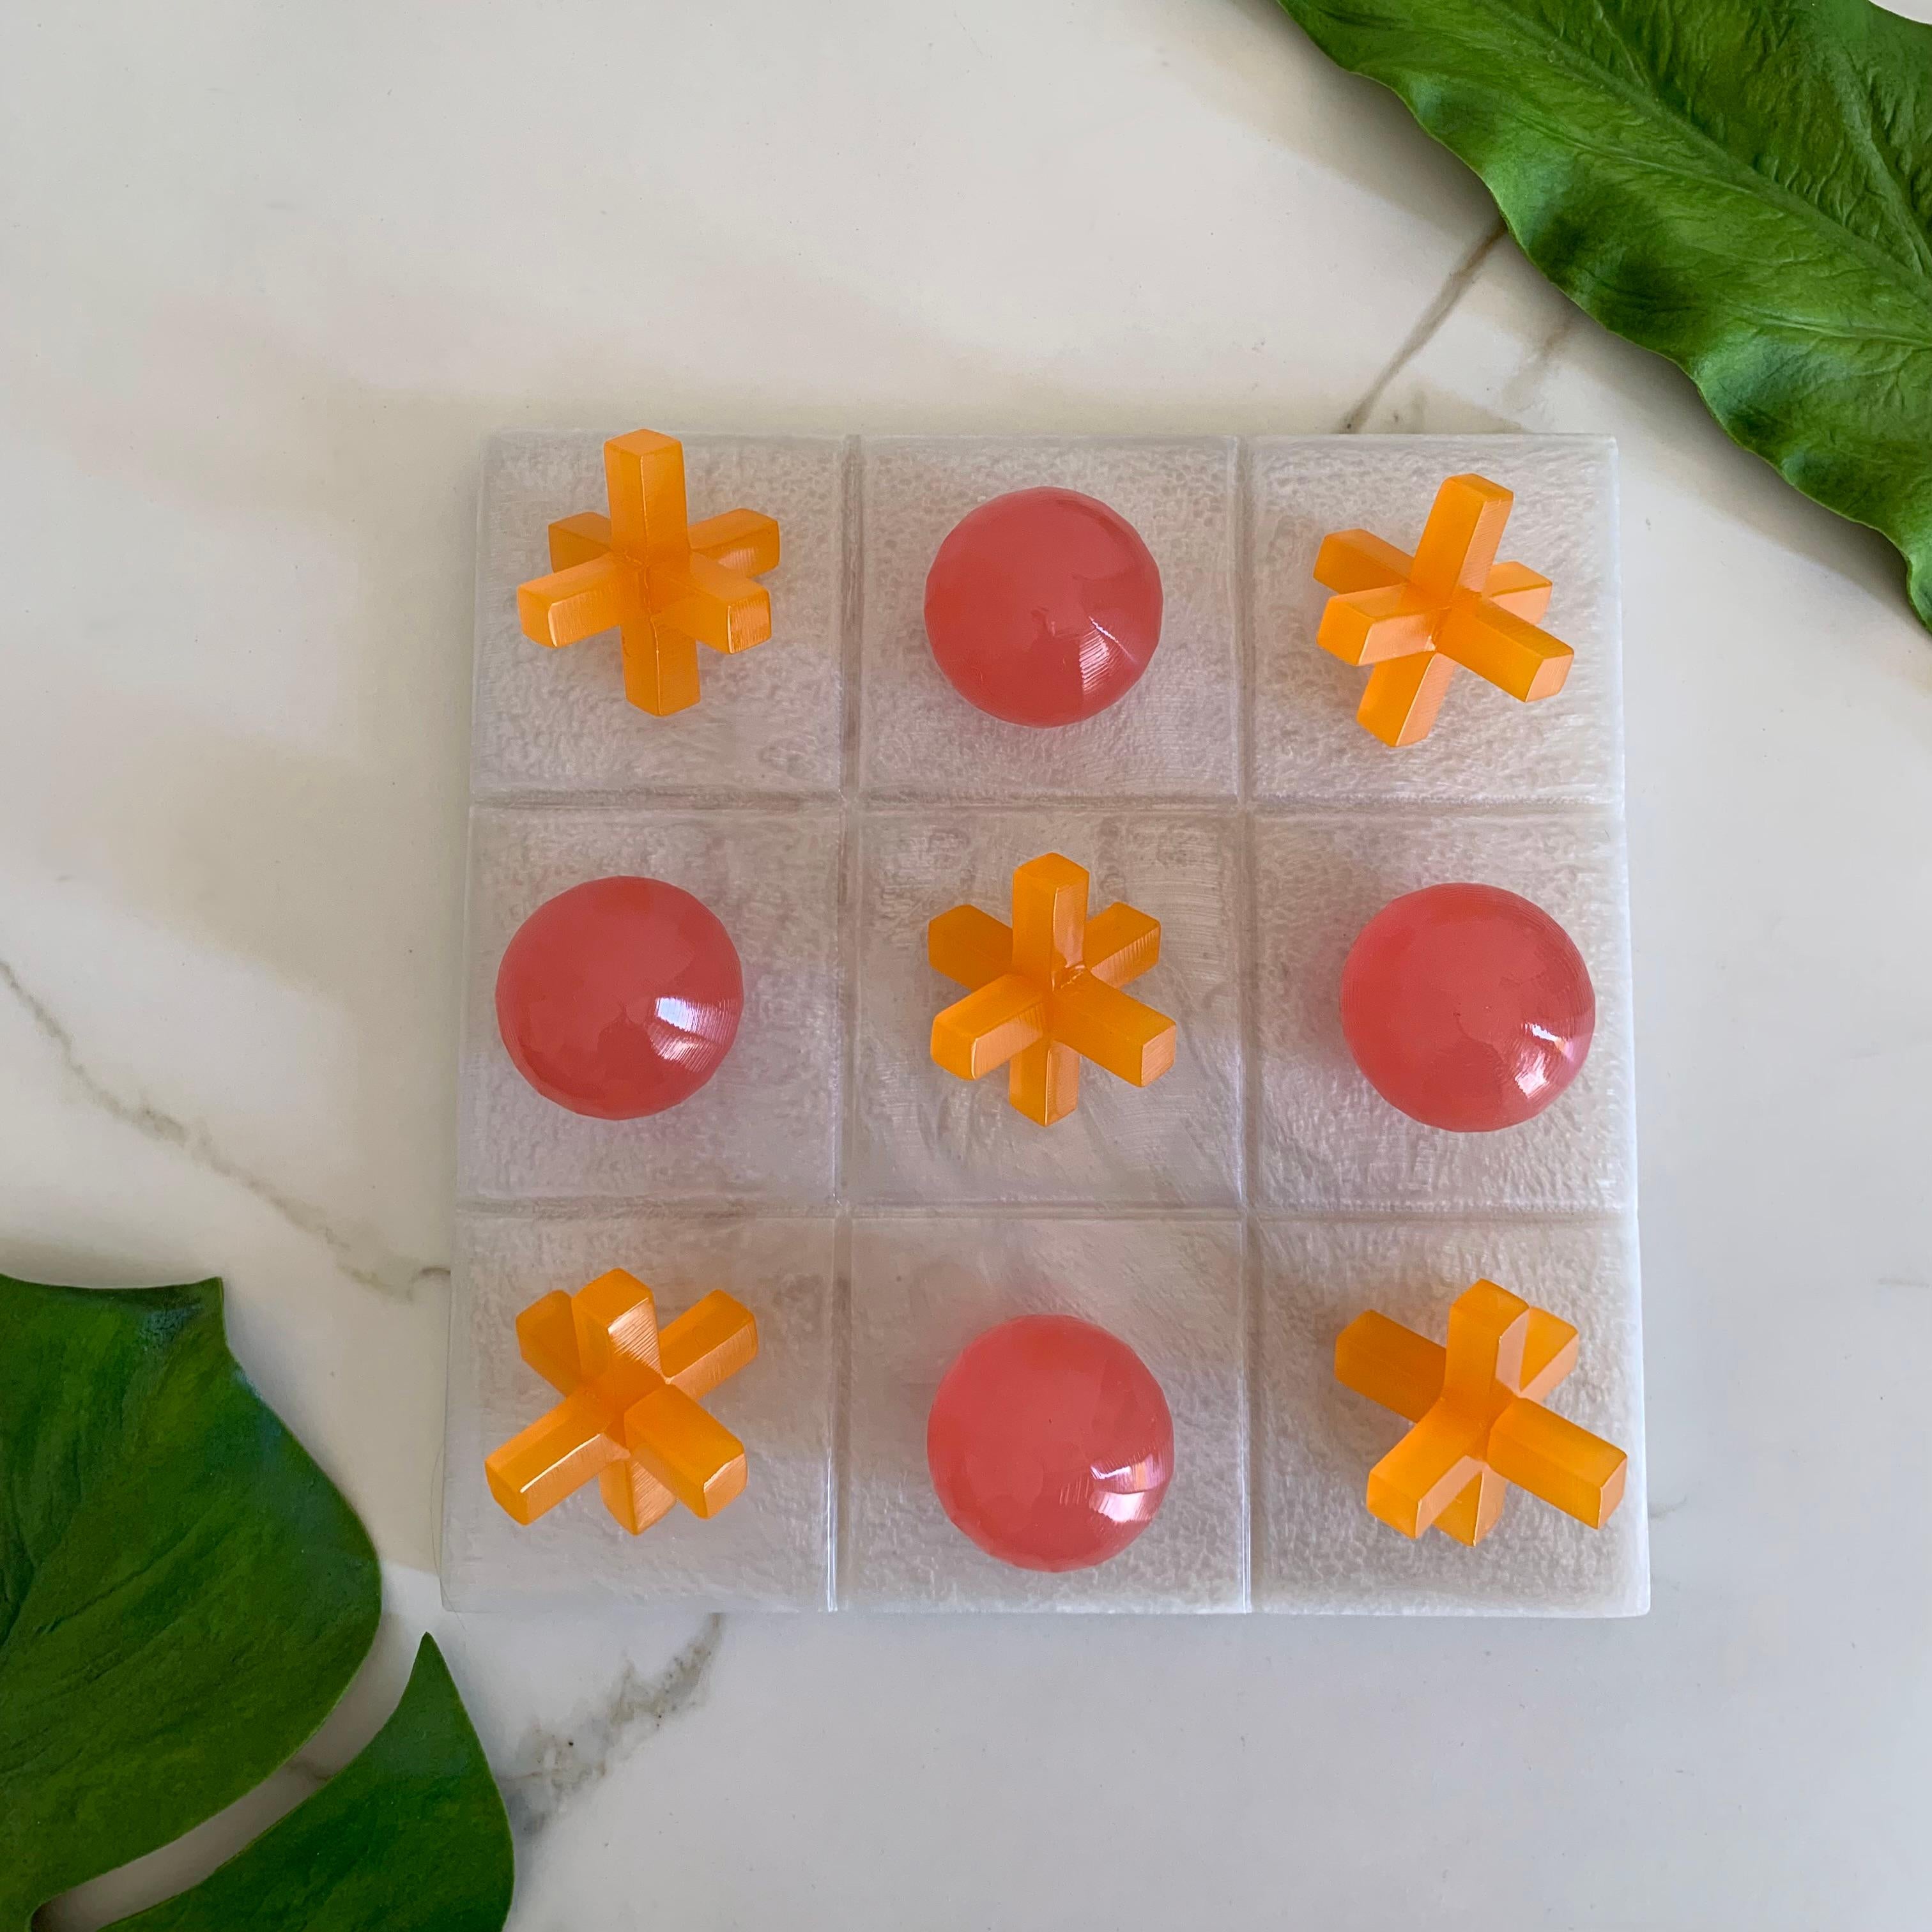 Our Tic Tac Toe is a beautiful, modern and fun take on the classic game. The three dimensional pieces are handmade in pink & orange resin, and board is in white pearl resin. It will be the coolest statement piece on any coffee table.

Materials: